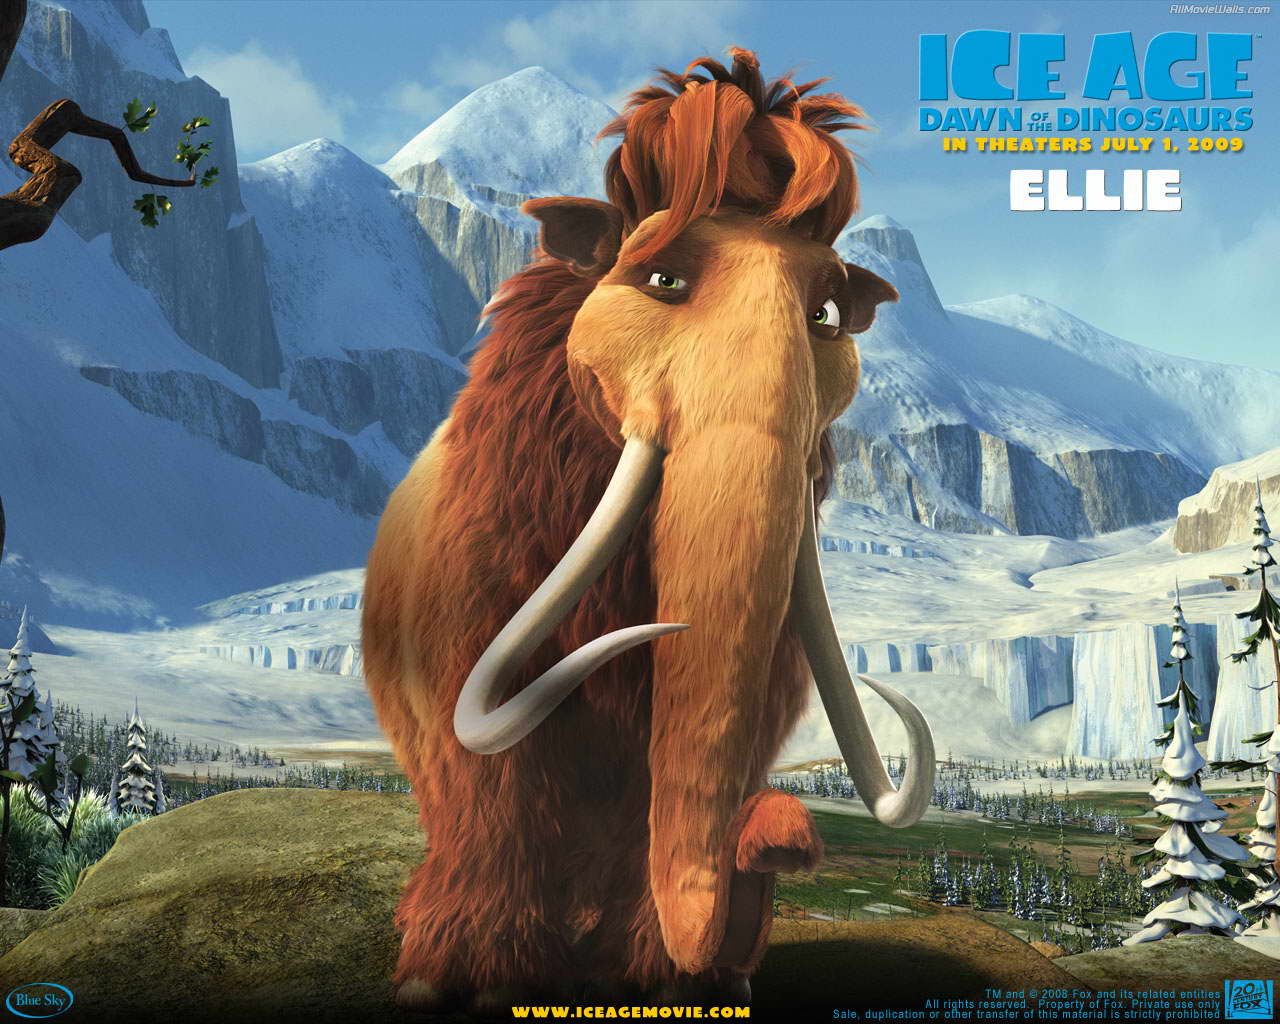 from Ice Age 3 (2009)